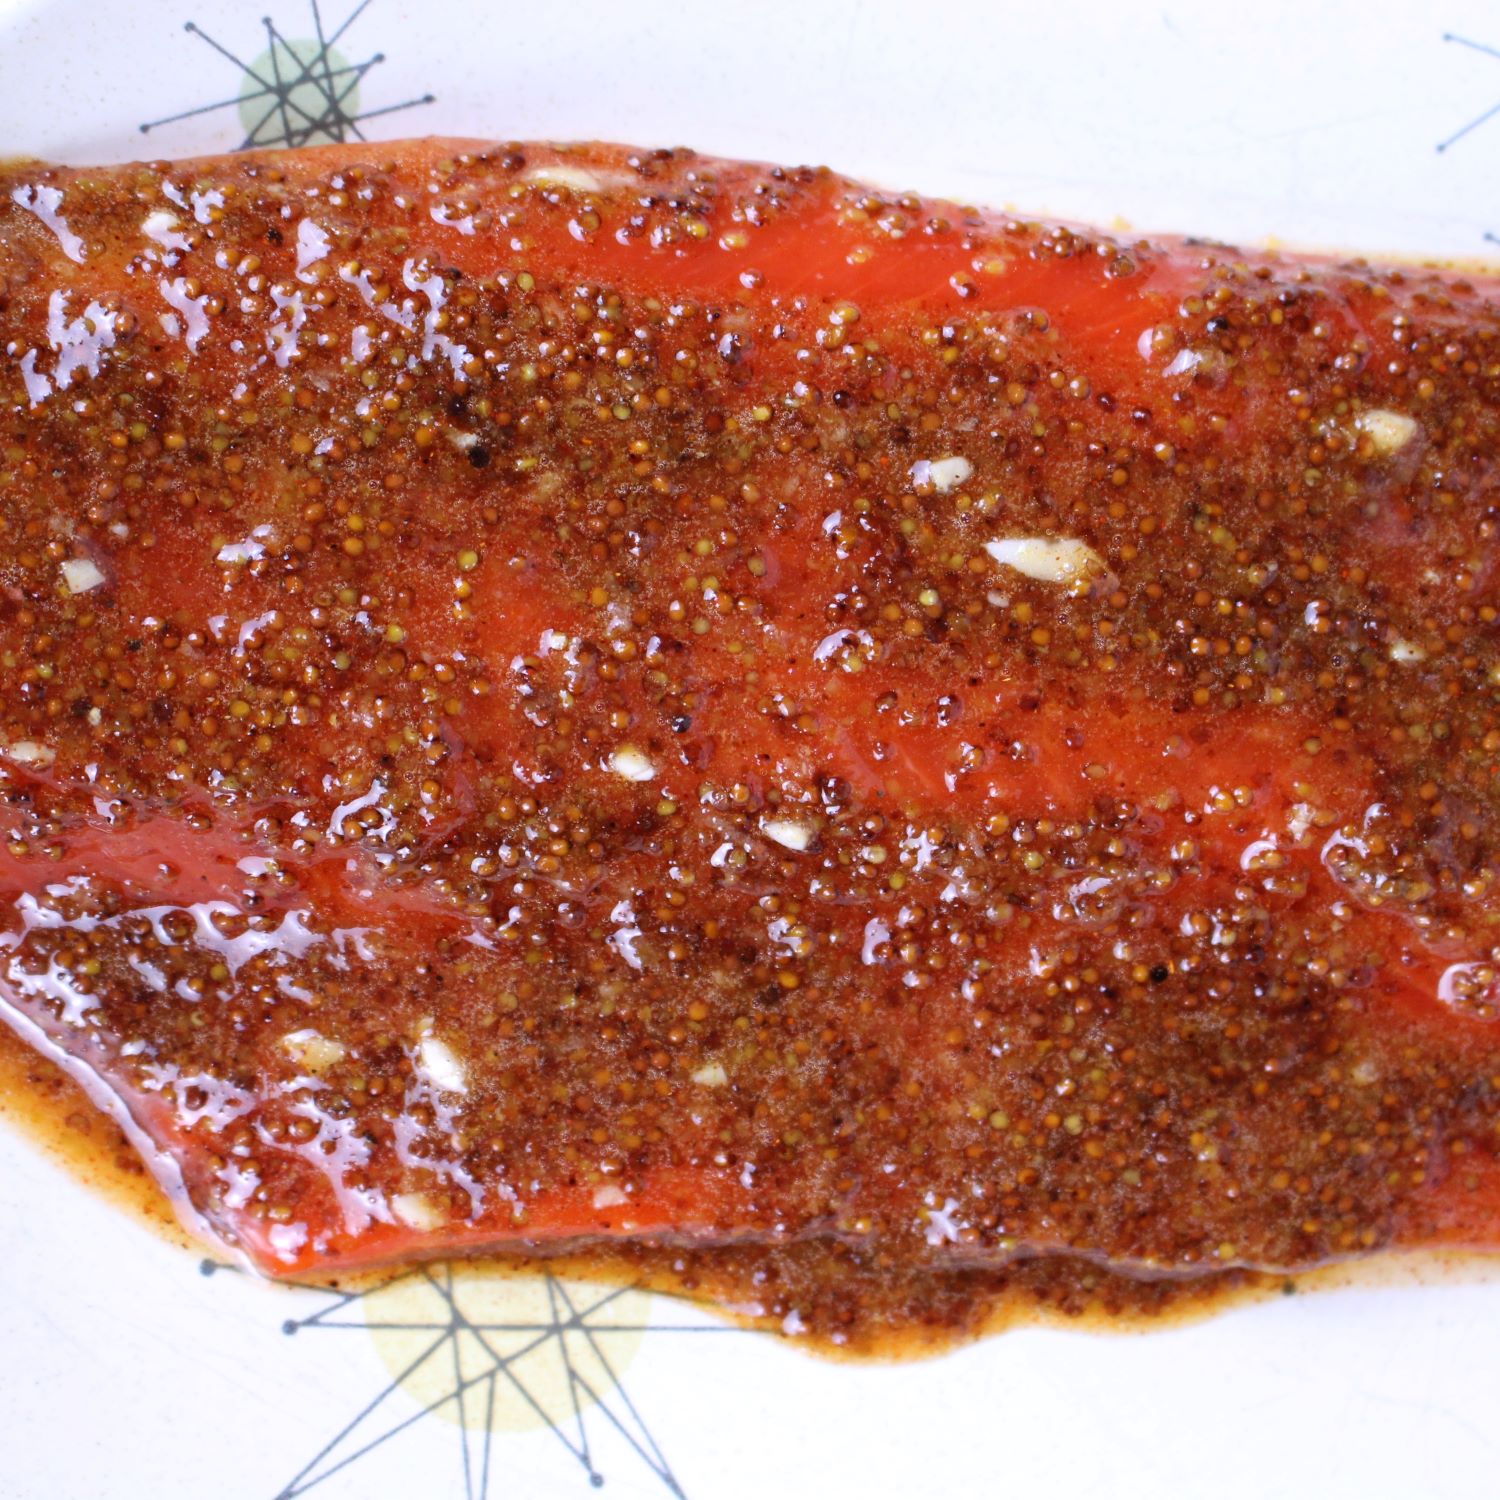 Wild caught salmon with a 4 ingredient glaze before grilling.